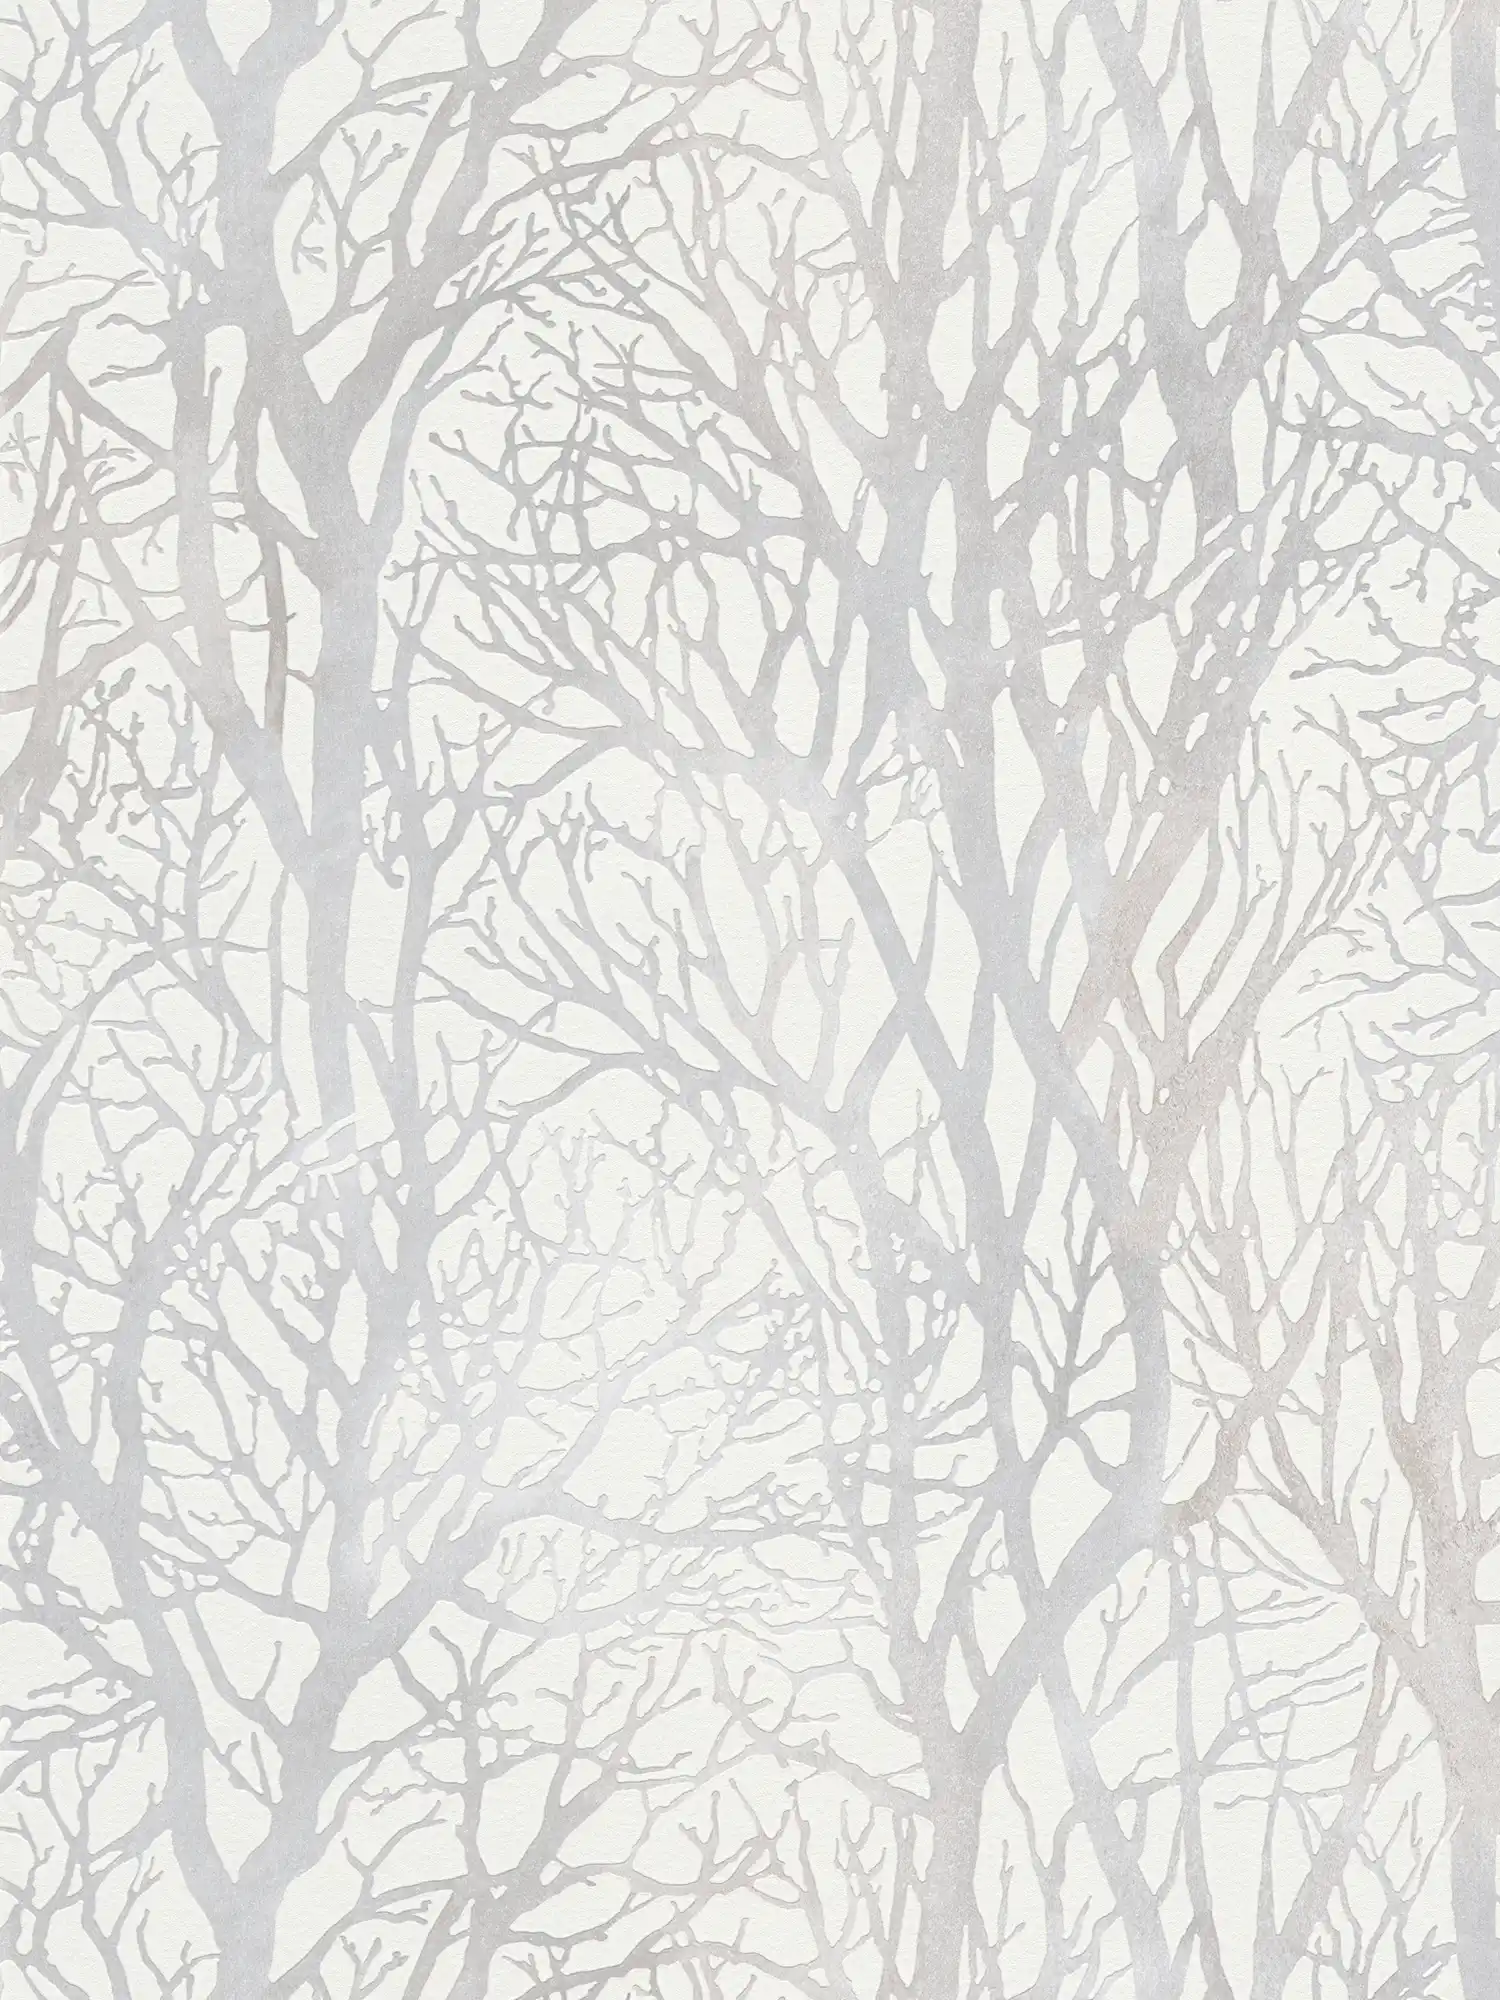 Silver grey wallpaper with branches motif and metallic effect - white, silver
